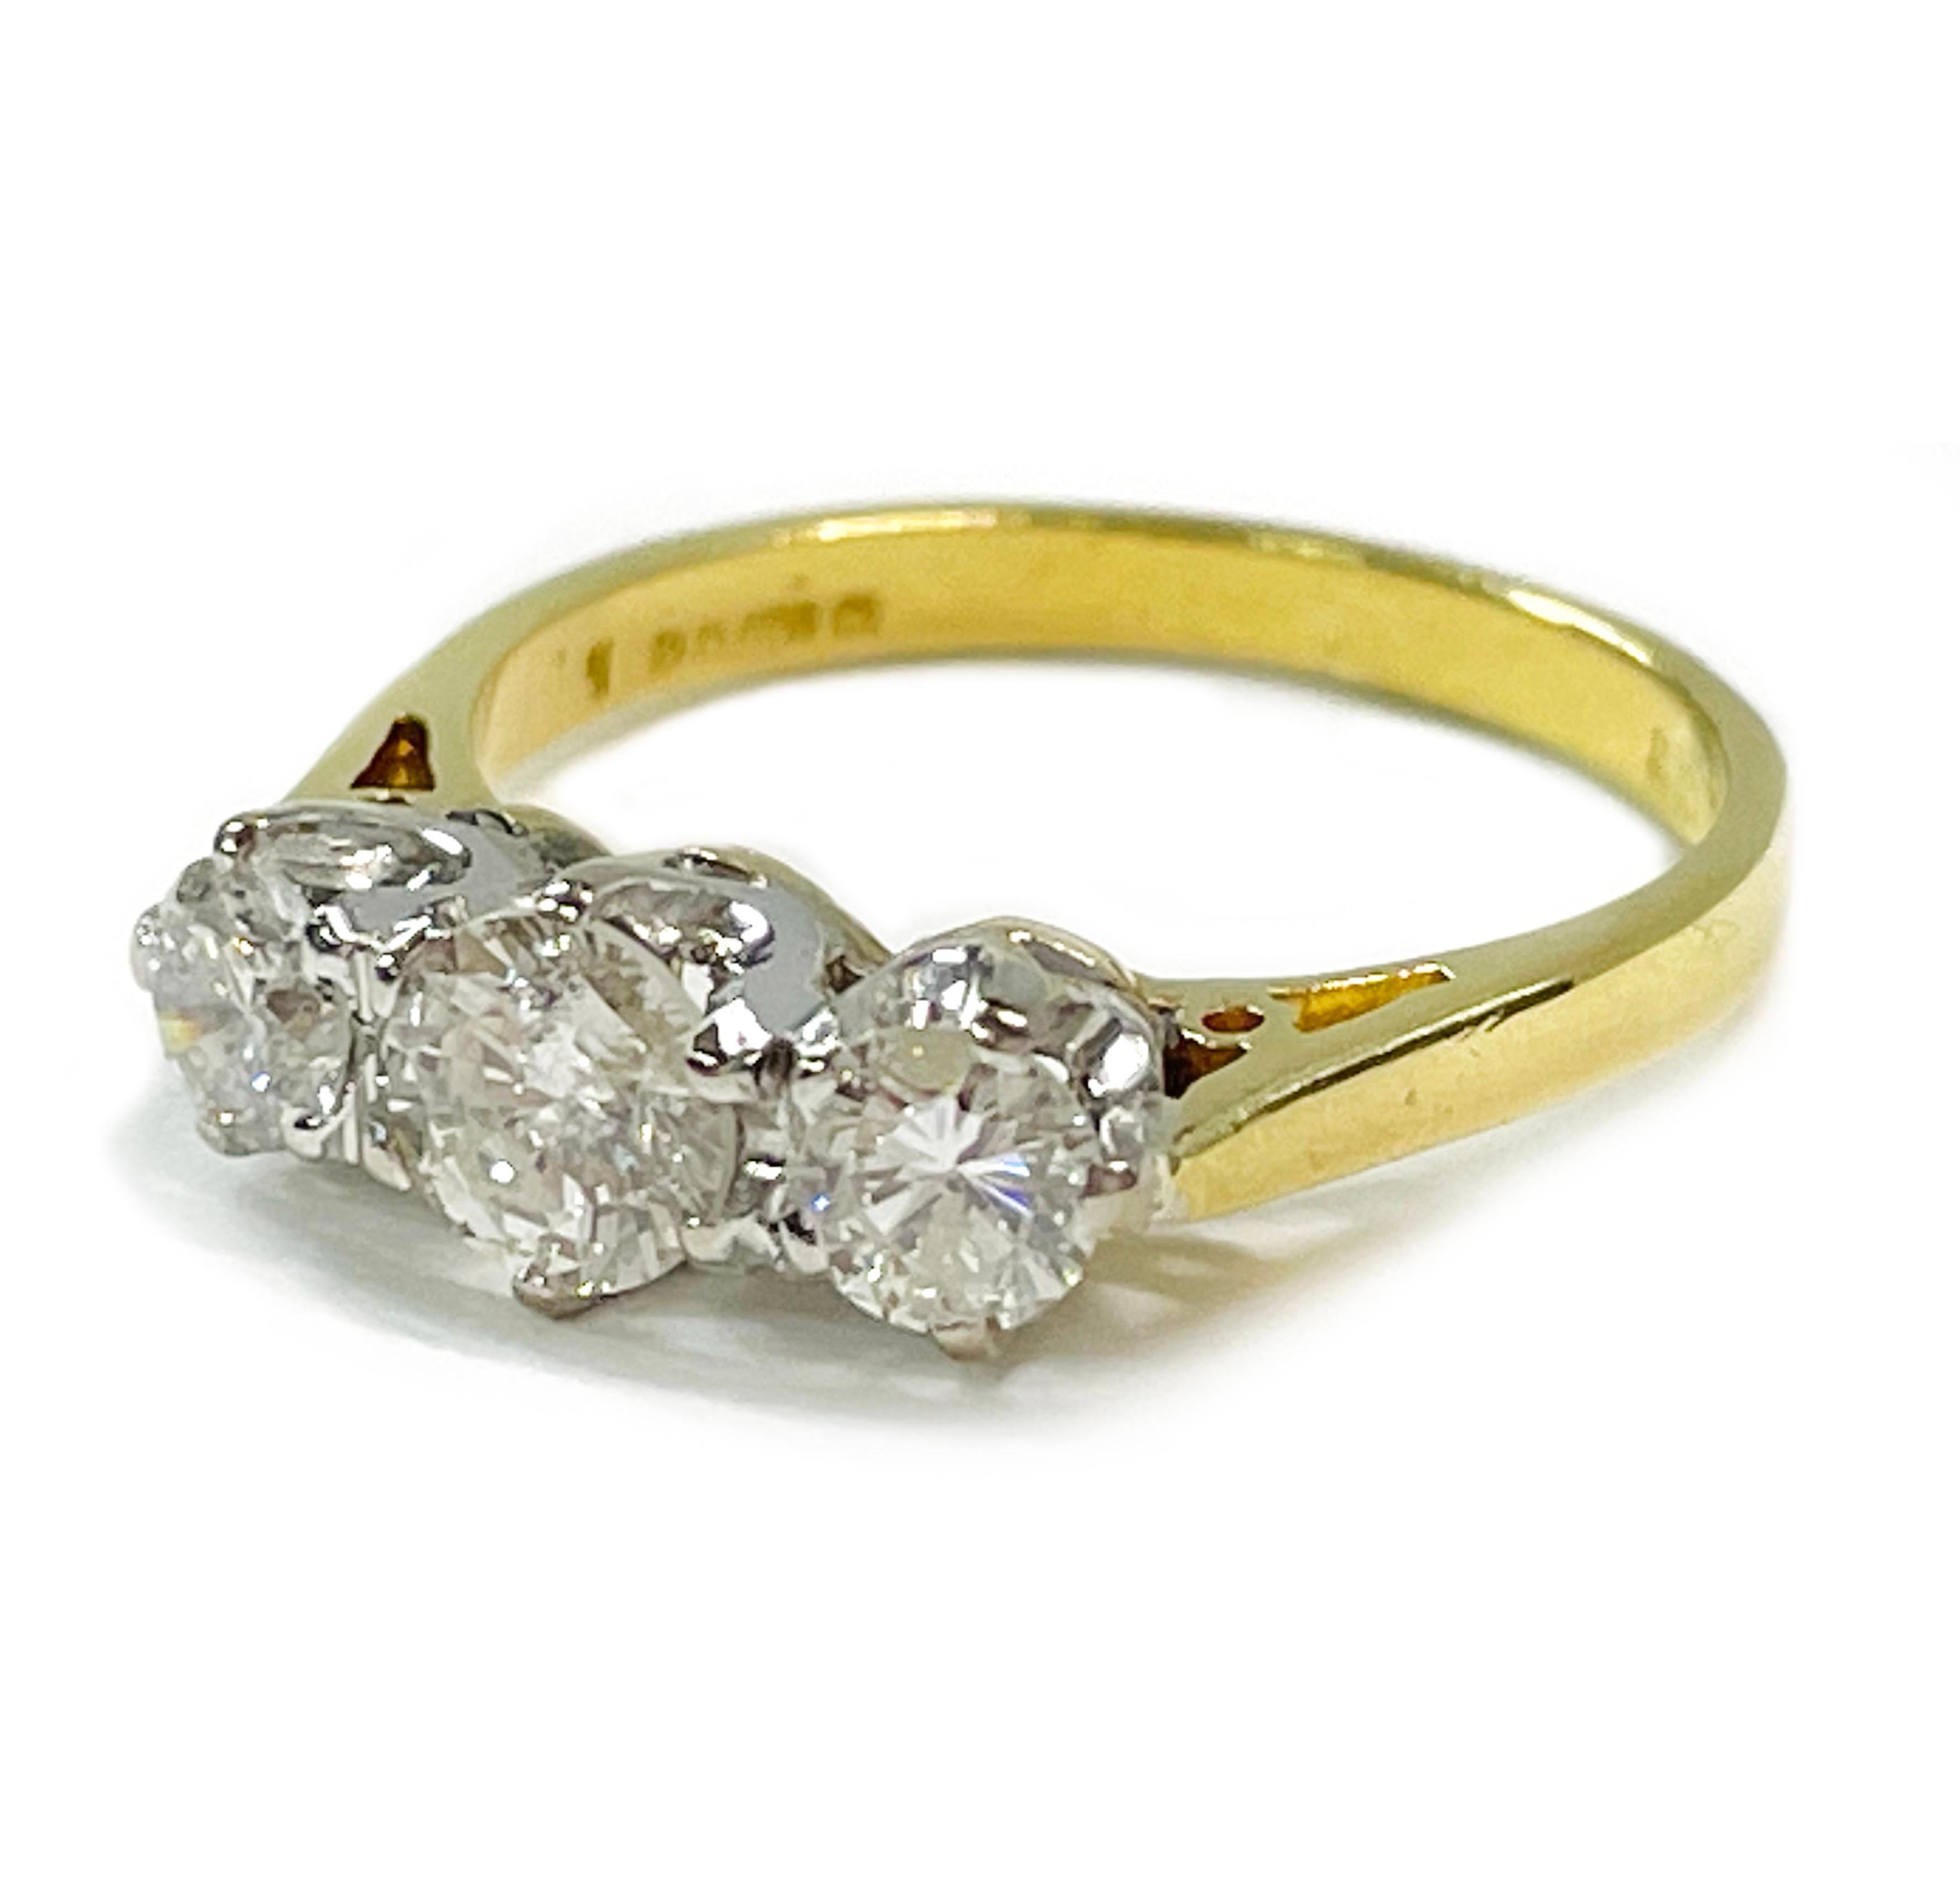 18 Karat Yellow Gold Platinum Three Diamond Antique Ring. Simple and elegant handmade three diamond ring design. All three diamonds are brilliant-cut and five prong-set in platinum. The center diamond is larger measuring 5.2mm, while the side